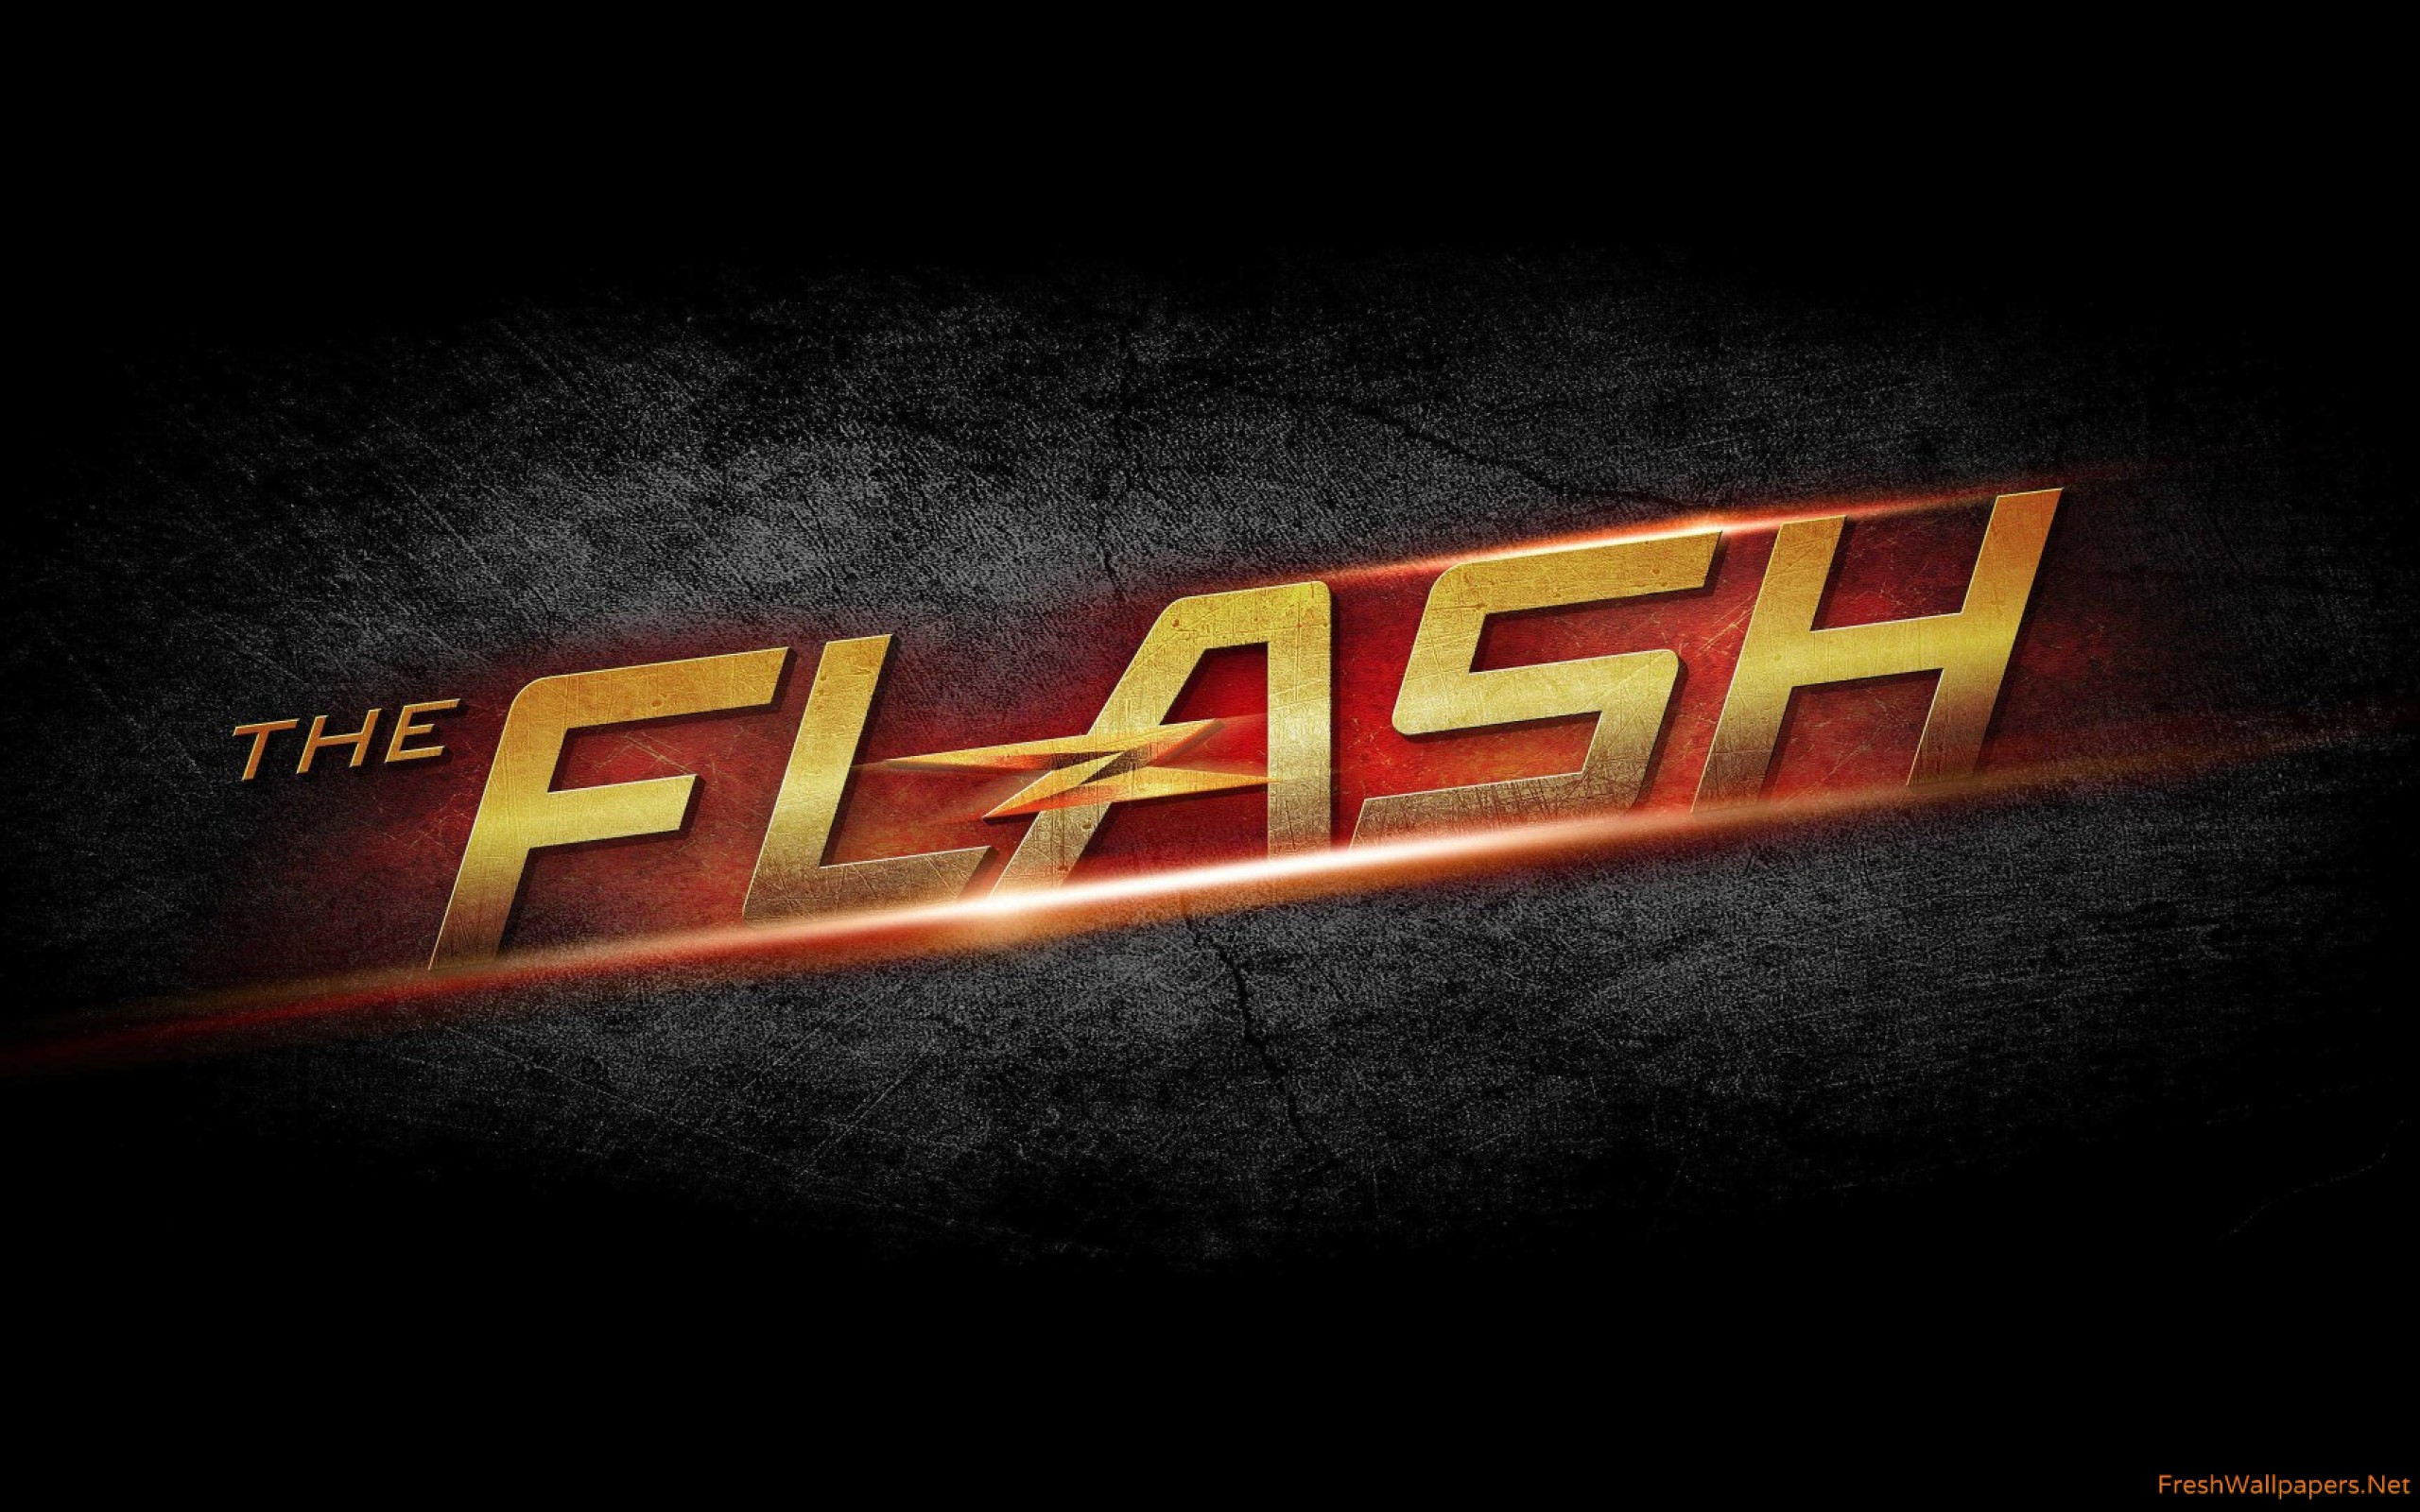 The Flash Tv Series Logo wallpapers | Freshwallpapers